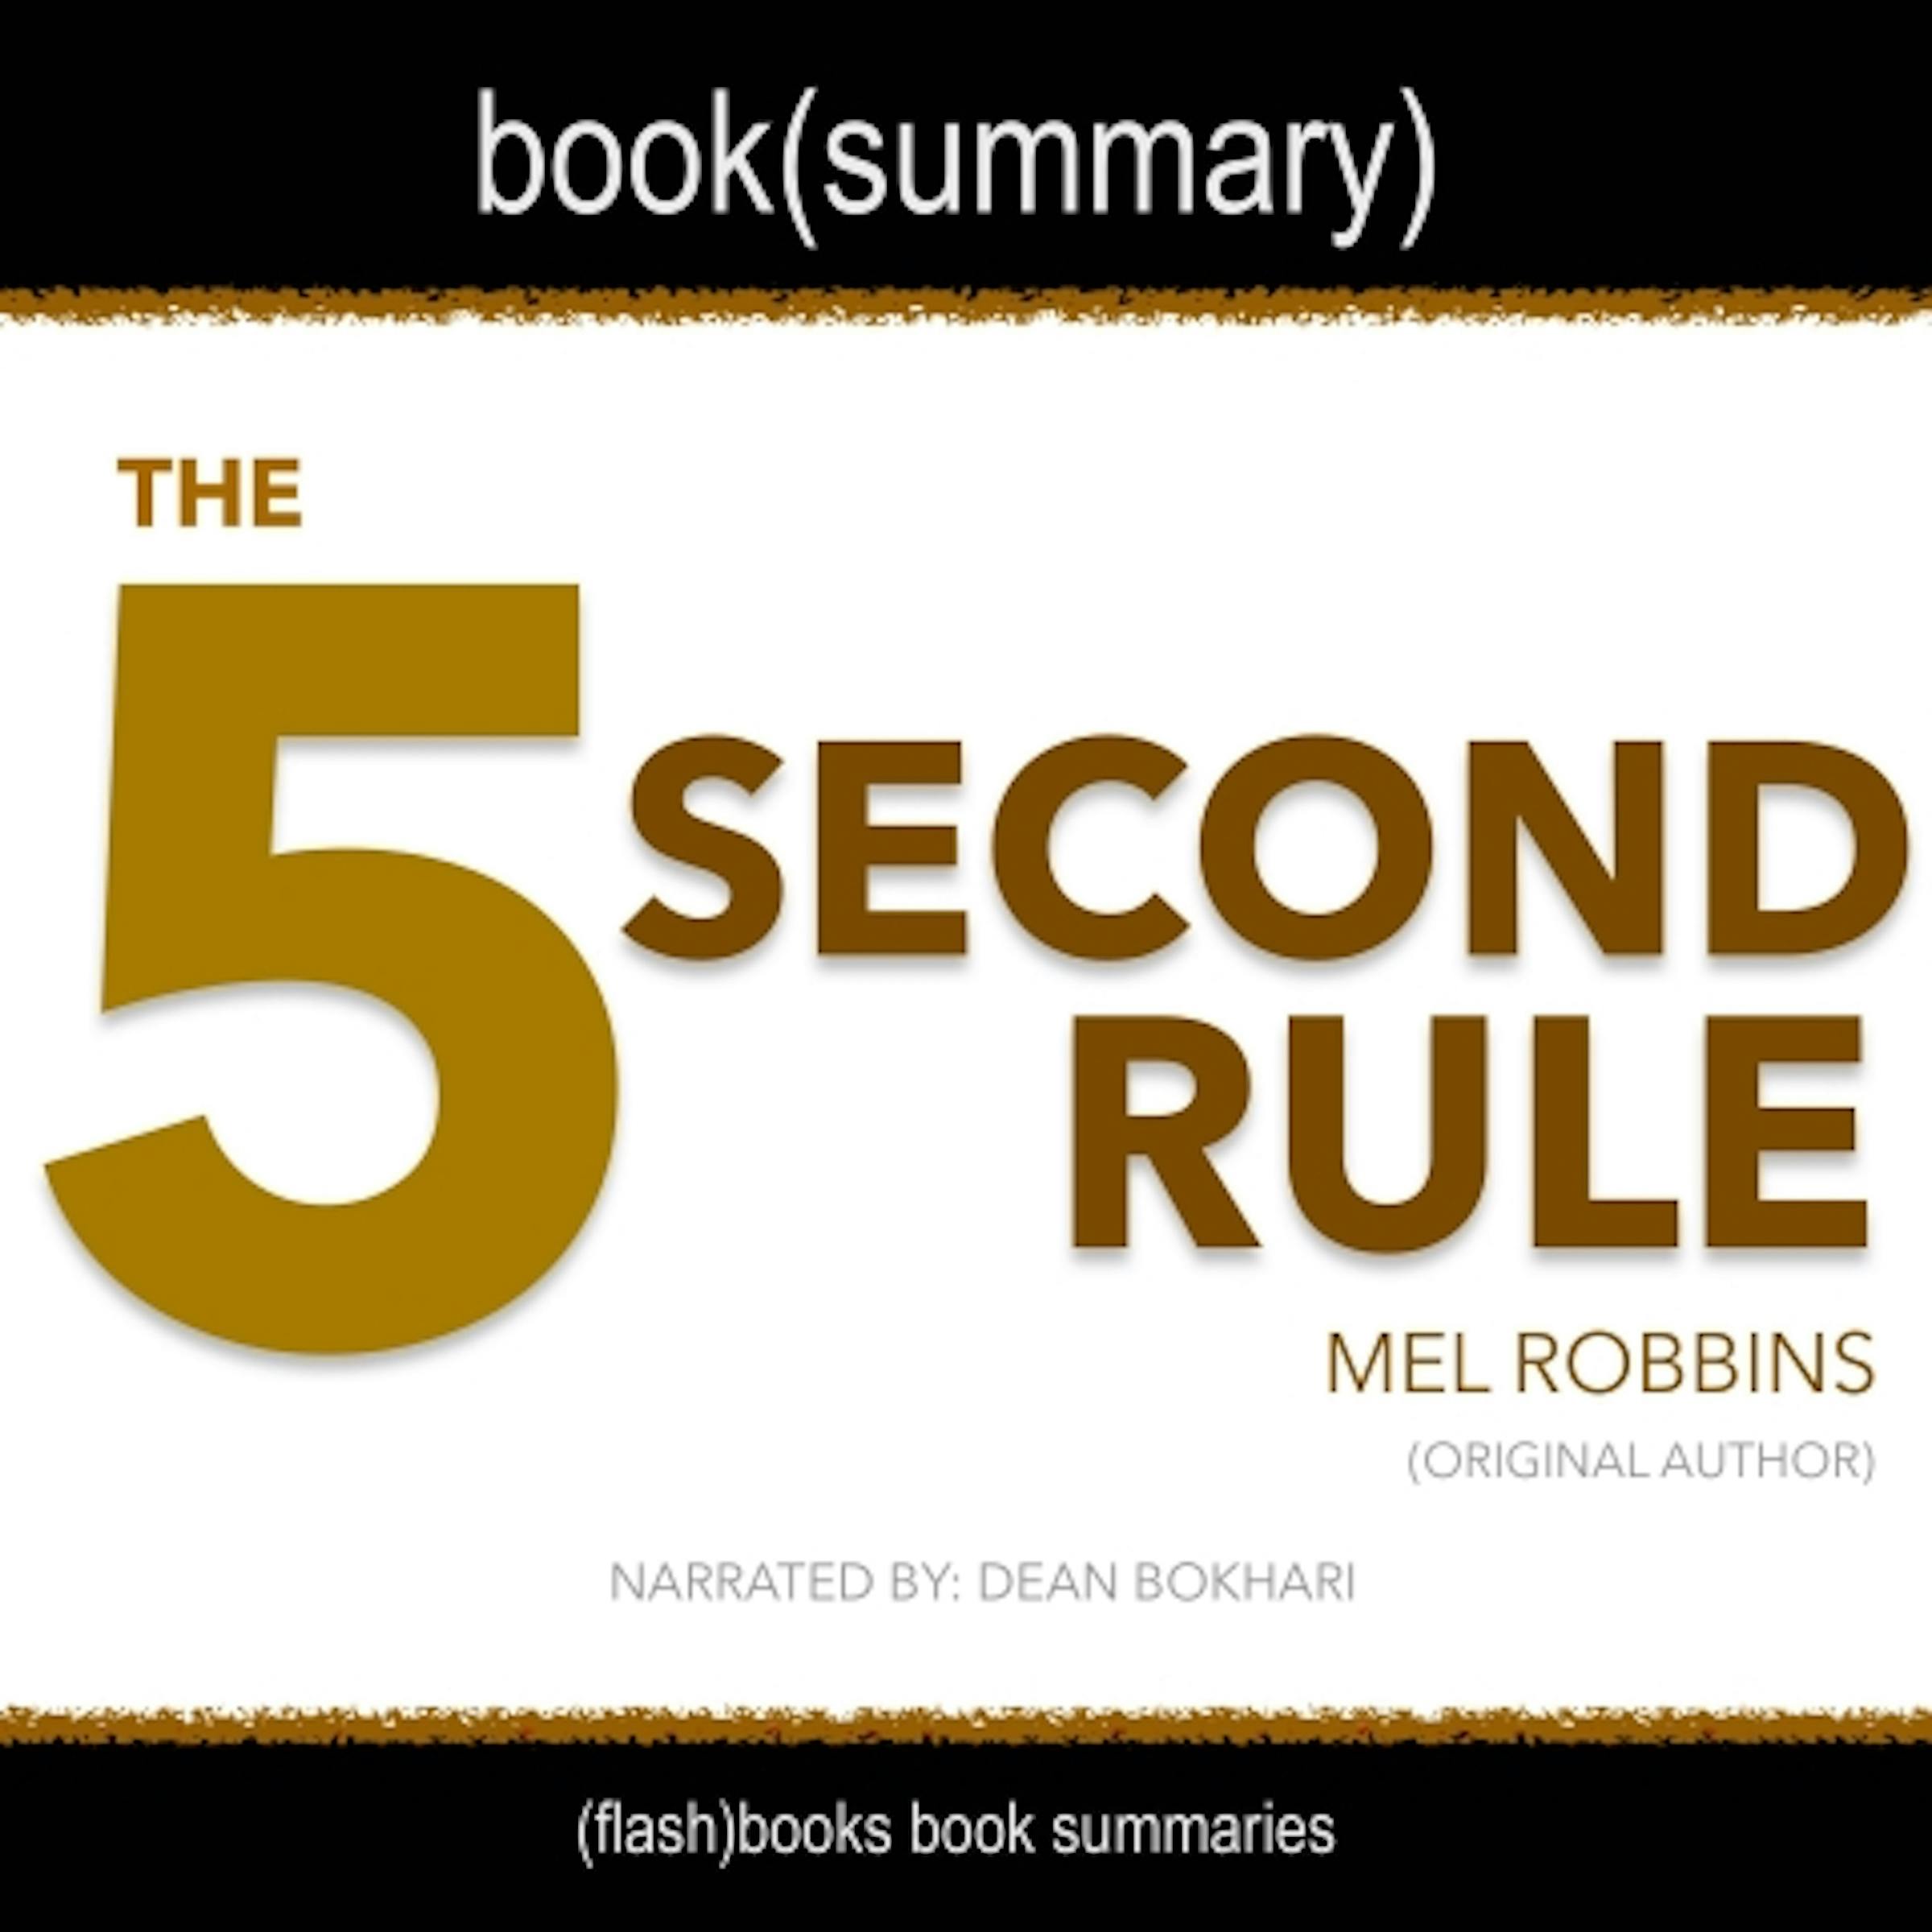 The 5 Second Rule by Mel Robbins - Book Summary: Transform Your Life, Work, and Confidence with Everyday Courage - undefined